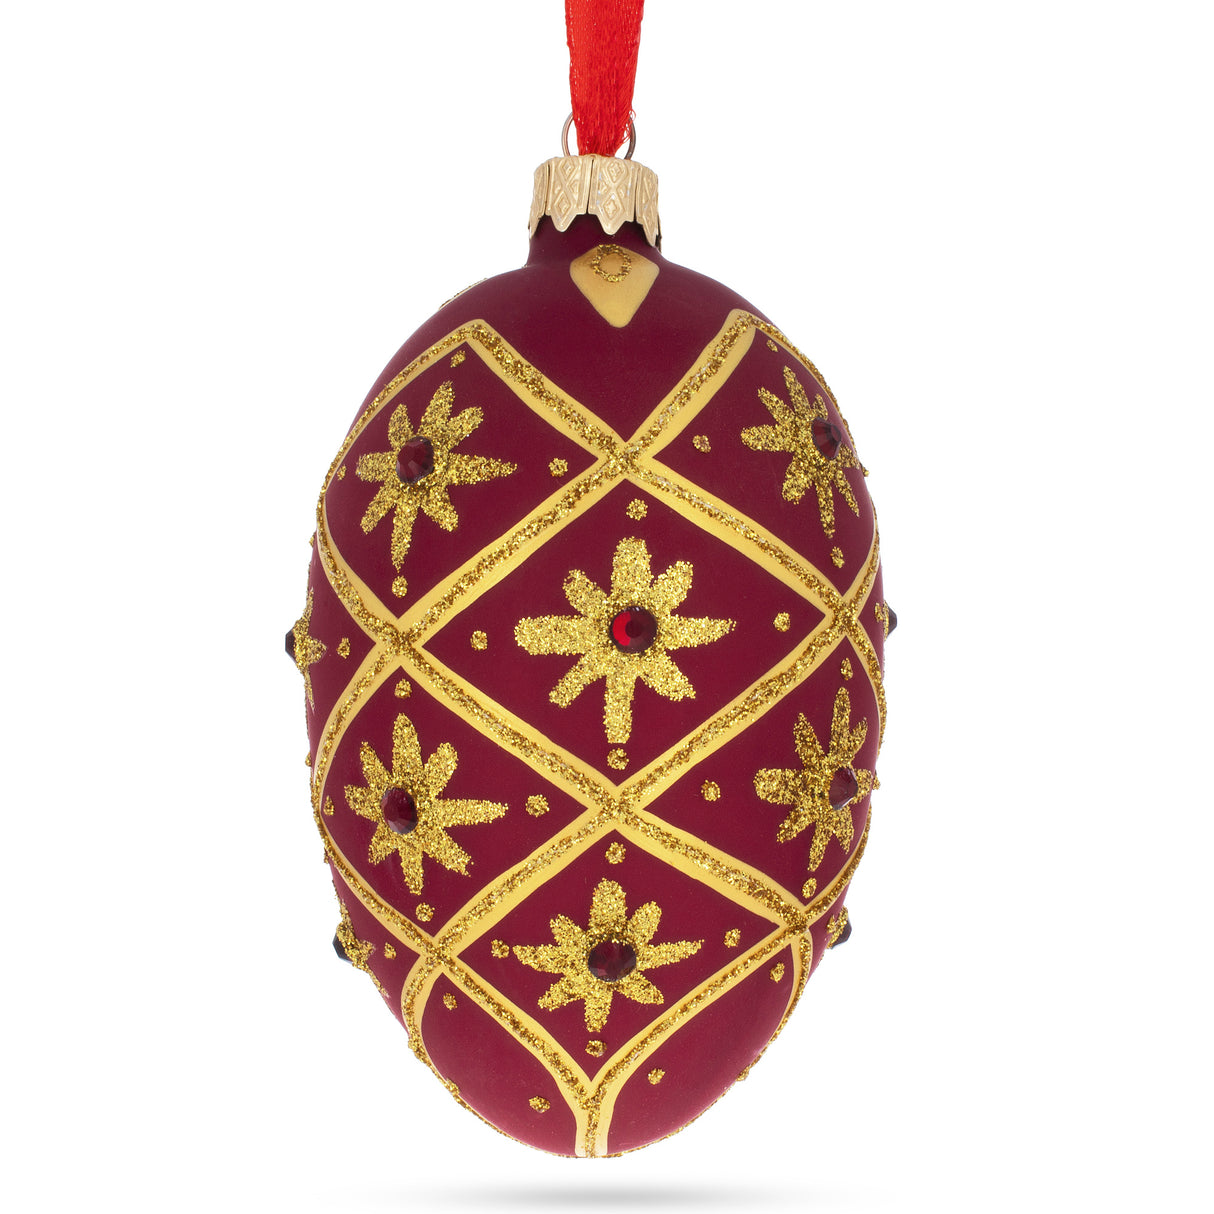 Gold Stars on Red Glass Egg Ornament 4 Inches in Red color, Oval shape